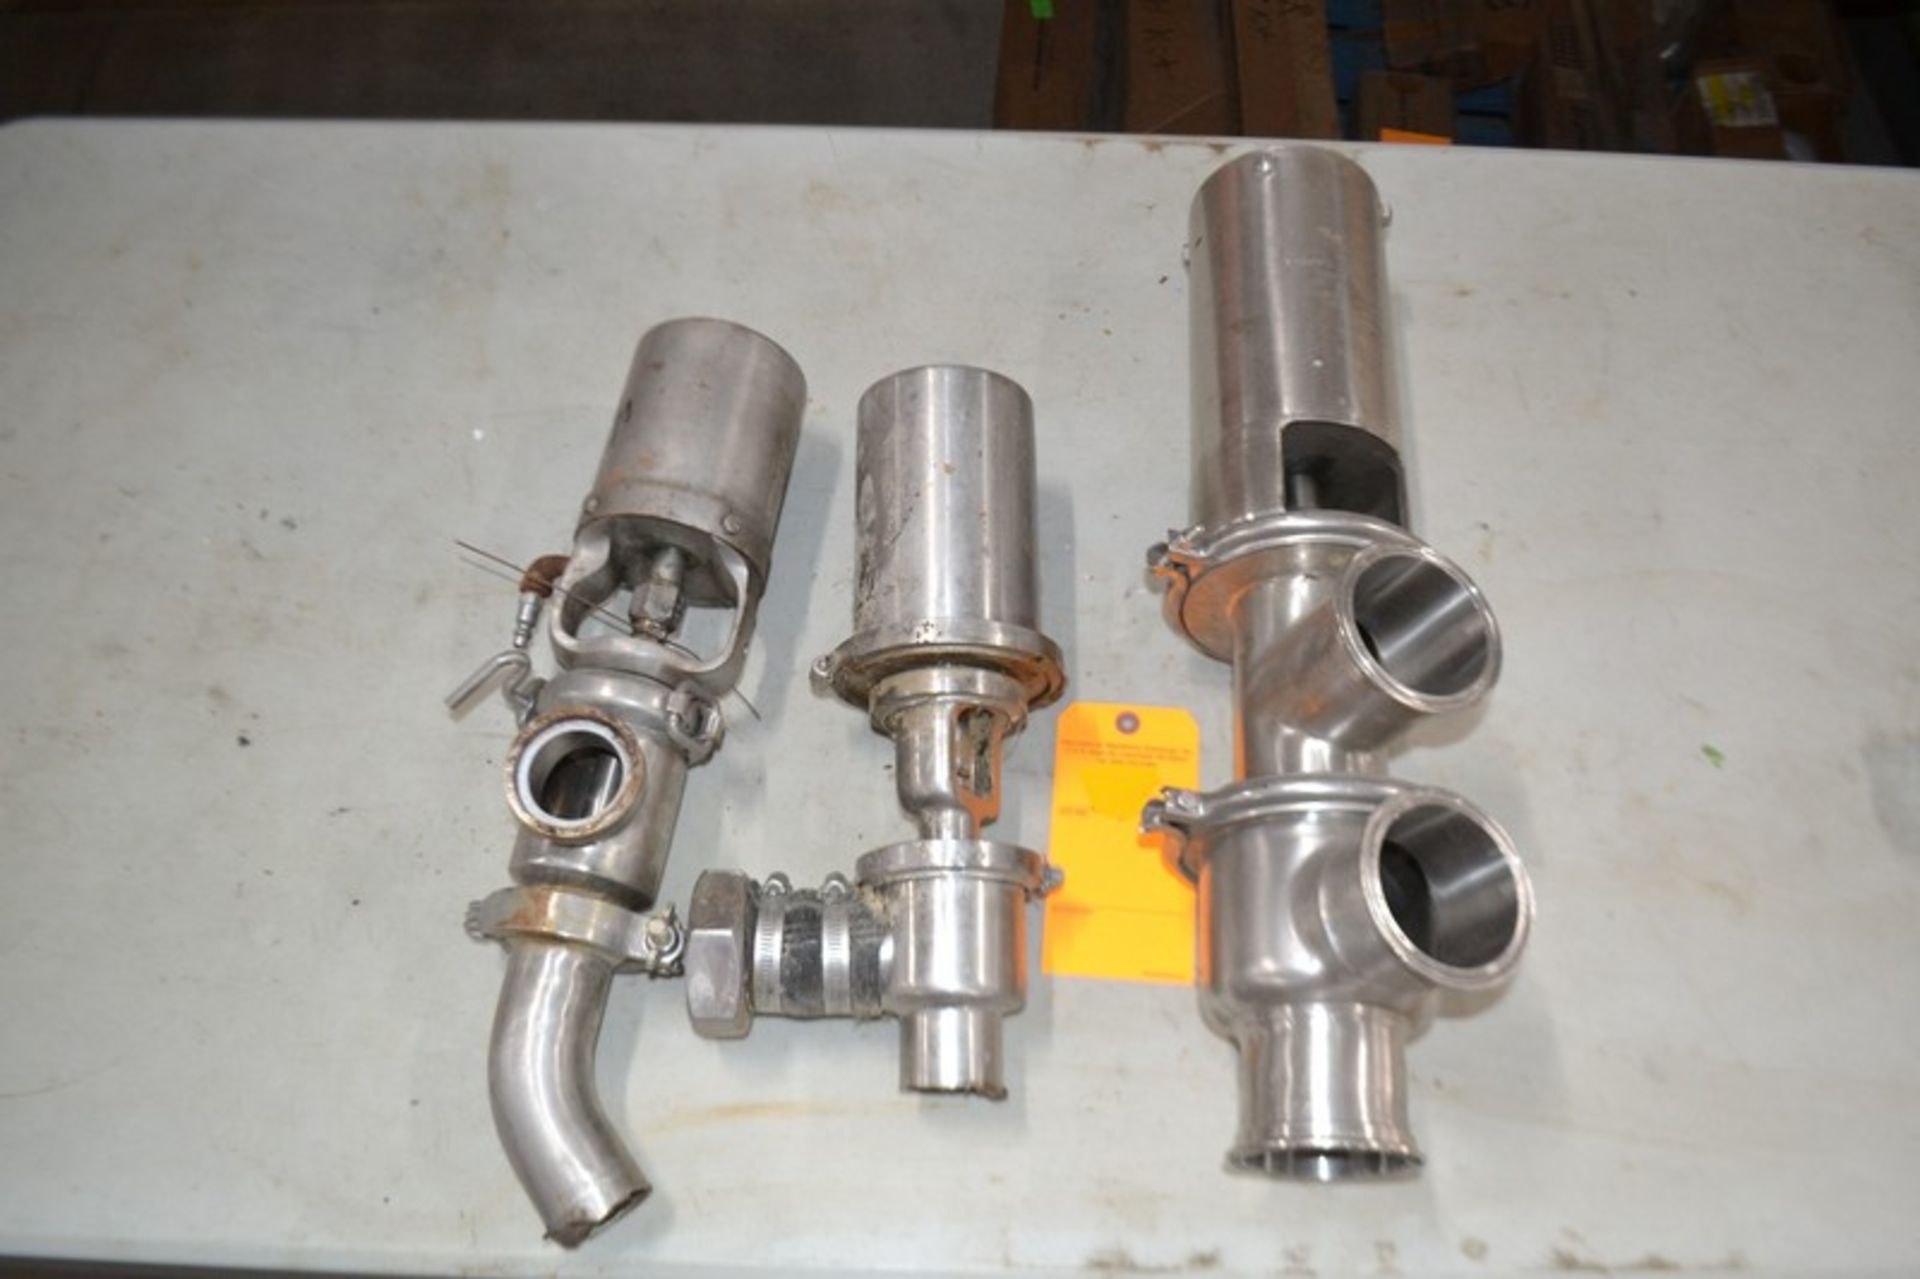 Lot of 3 S/S Valves (1) 3" Divert Type Air Valve and (2) Stainless Product 2" Stop Valves.